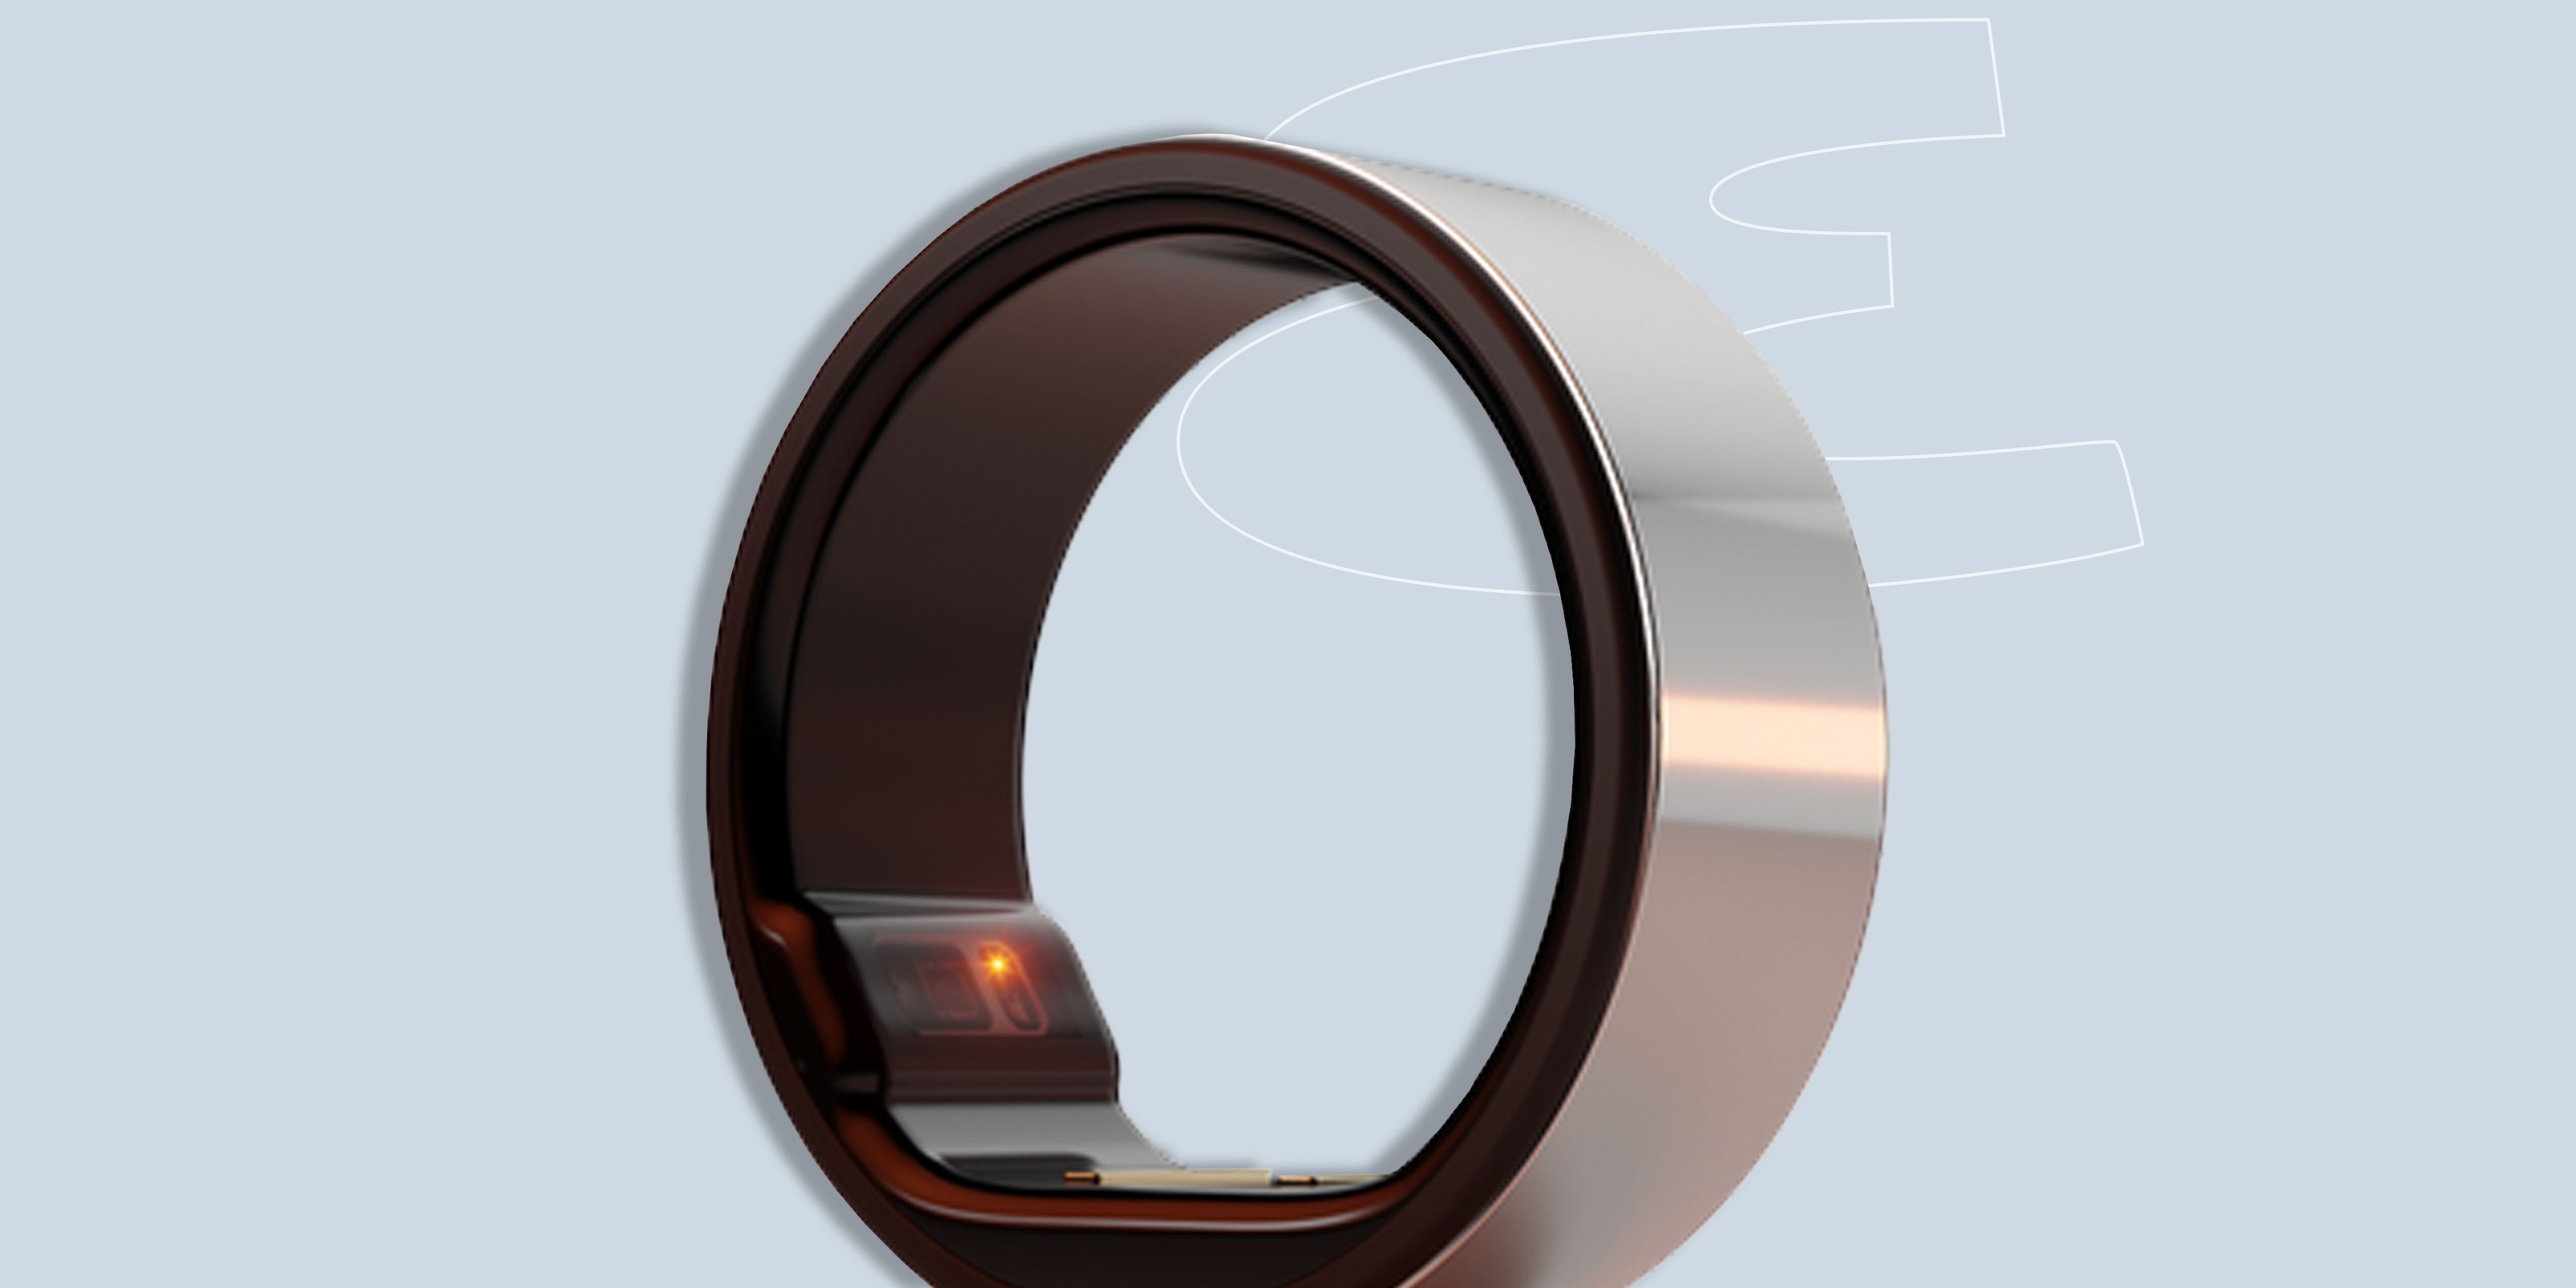 New Oura Ring Features Want to Help You Manage Stress - CNET